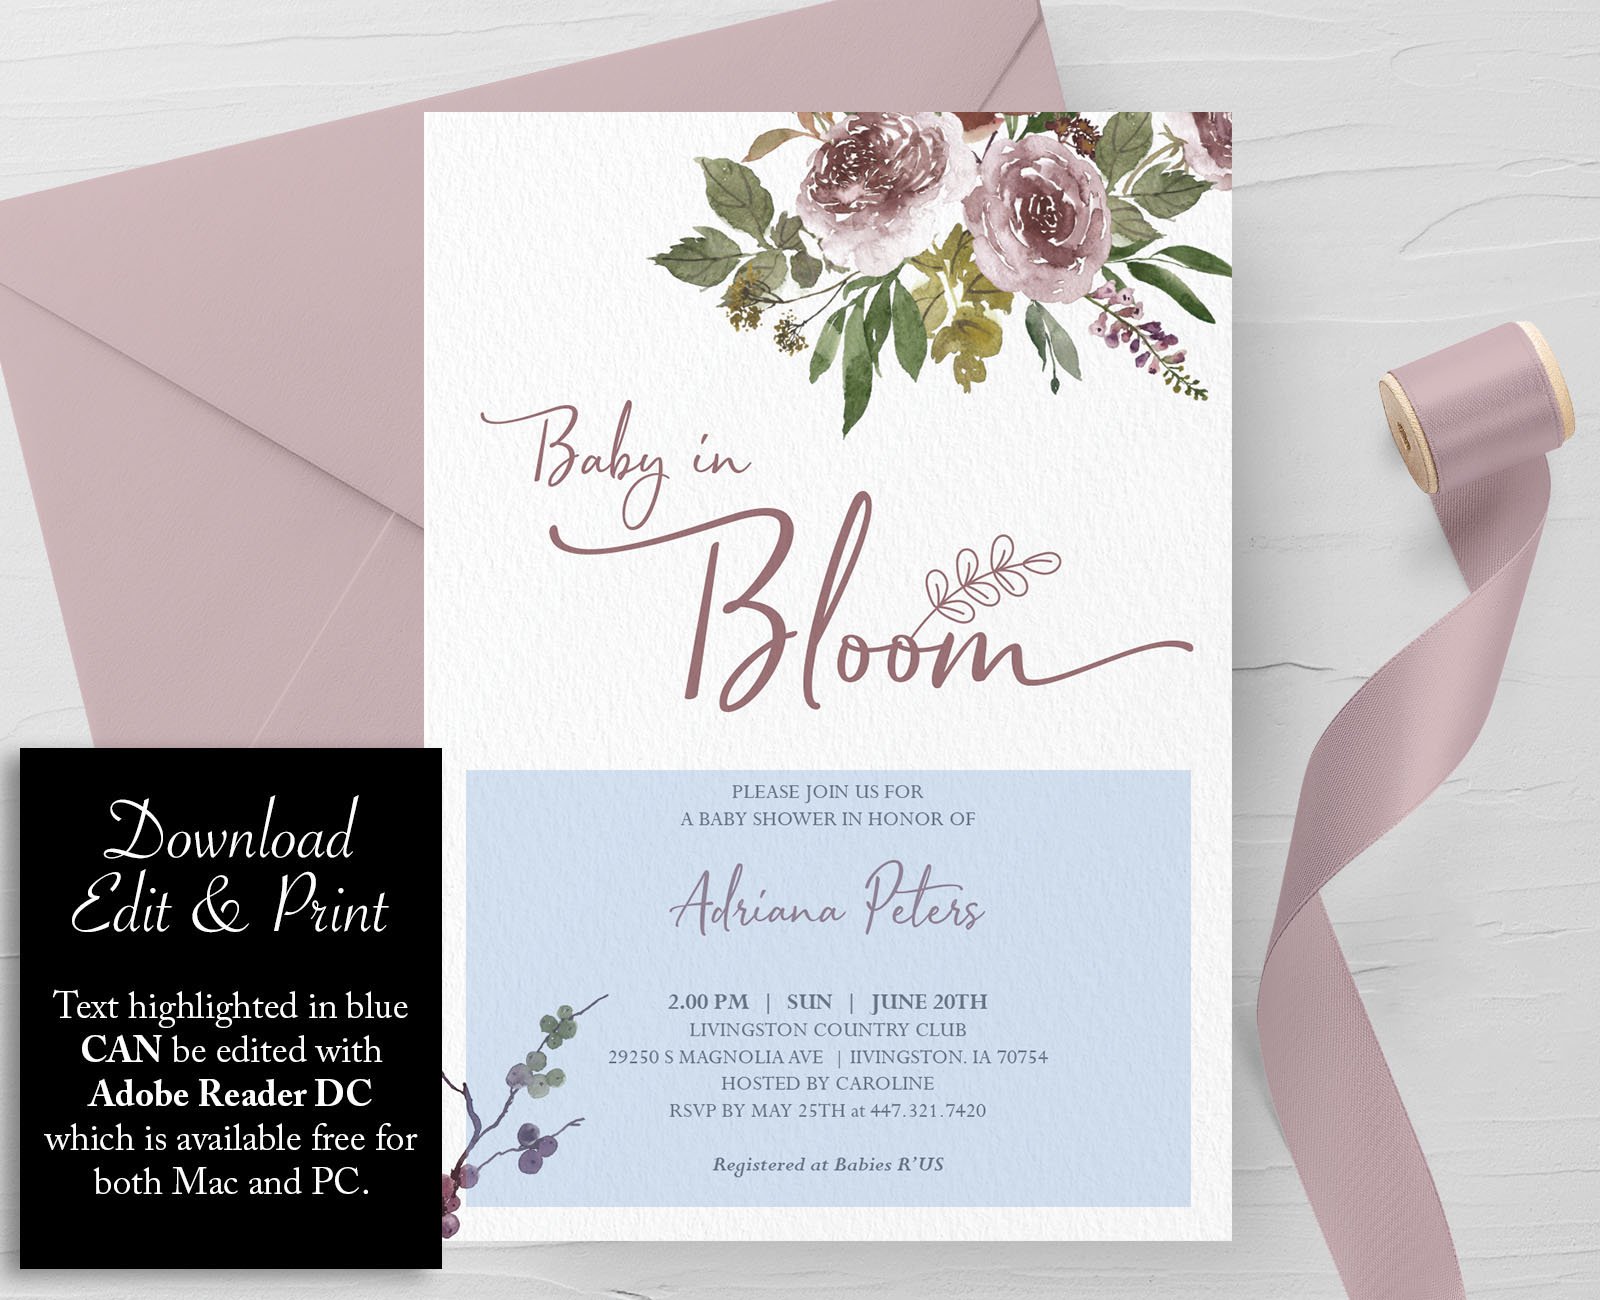 Baby in Bloom Baby Shower Invitation preview image.